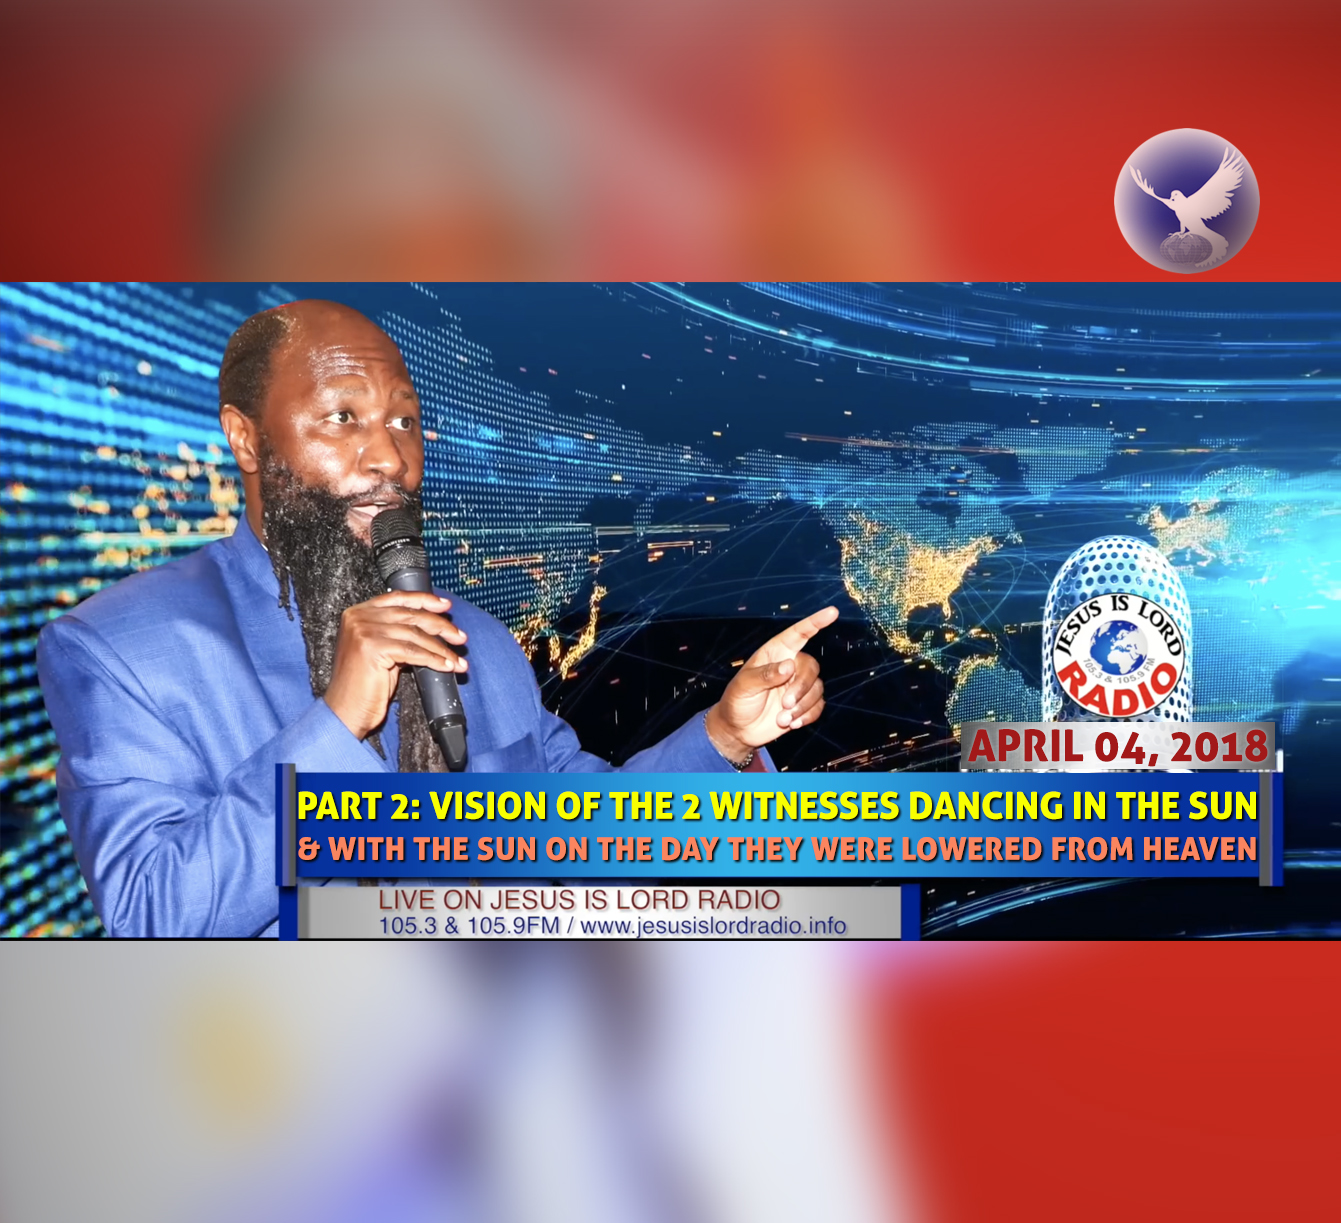 EPISODE 168 - PART 2: VISION OF THE 2 WITNESSES DANCING IN THE DUN & WITH THE SUN ON THE DAY THEY WERE LOWERED FROM HEAVEN (04APR2018) - PROPHET DR. OWUOR